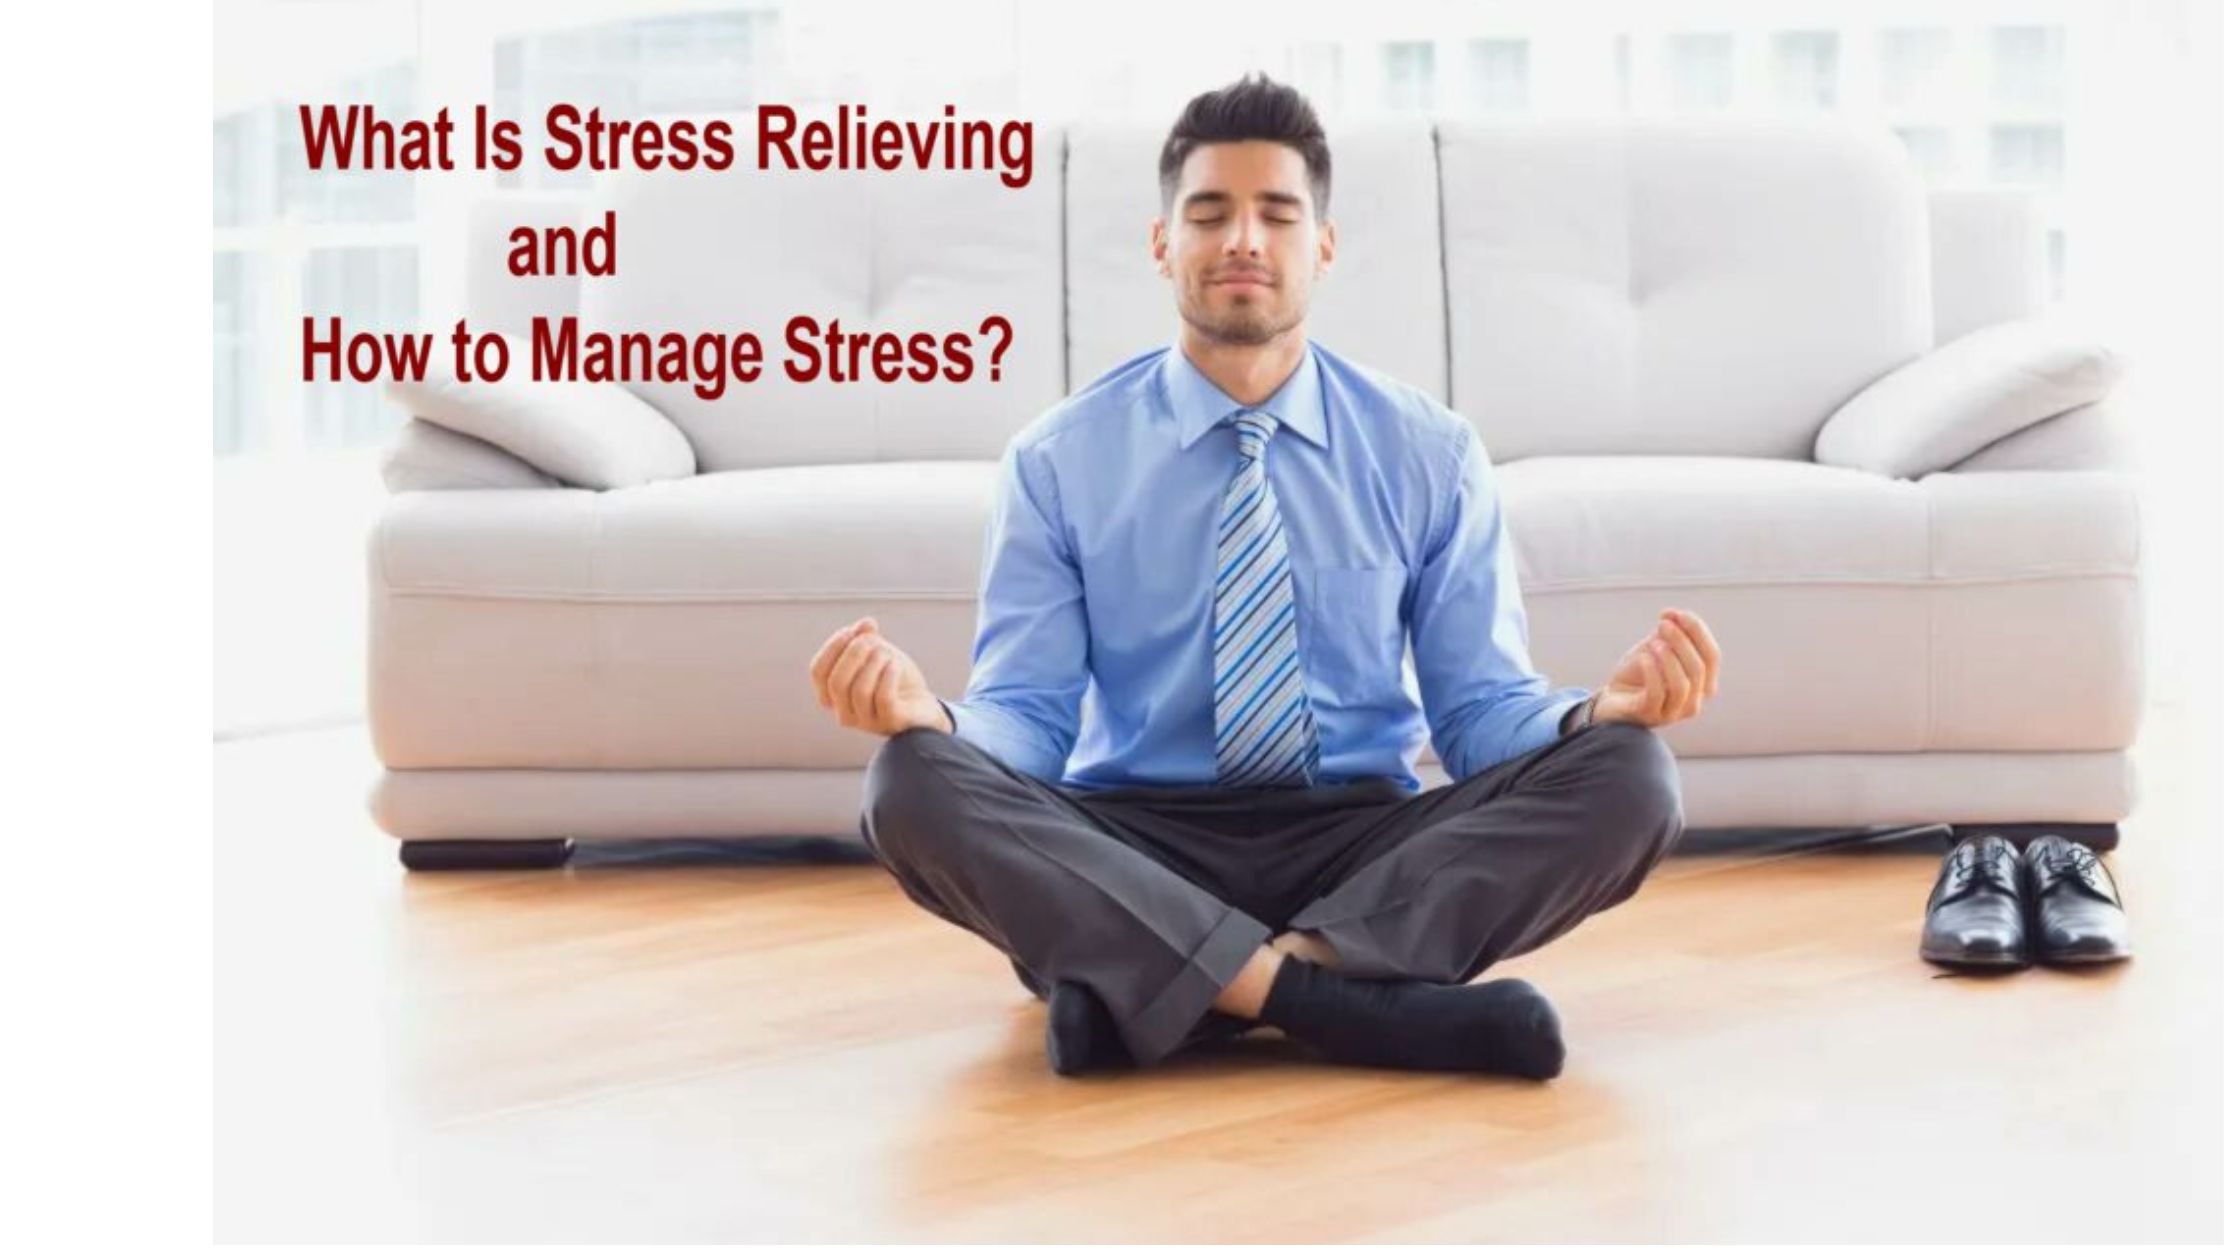 What Is Stress Relieving and How to Manage Stress?